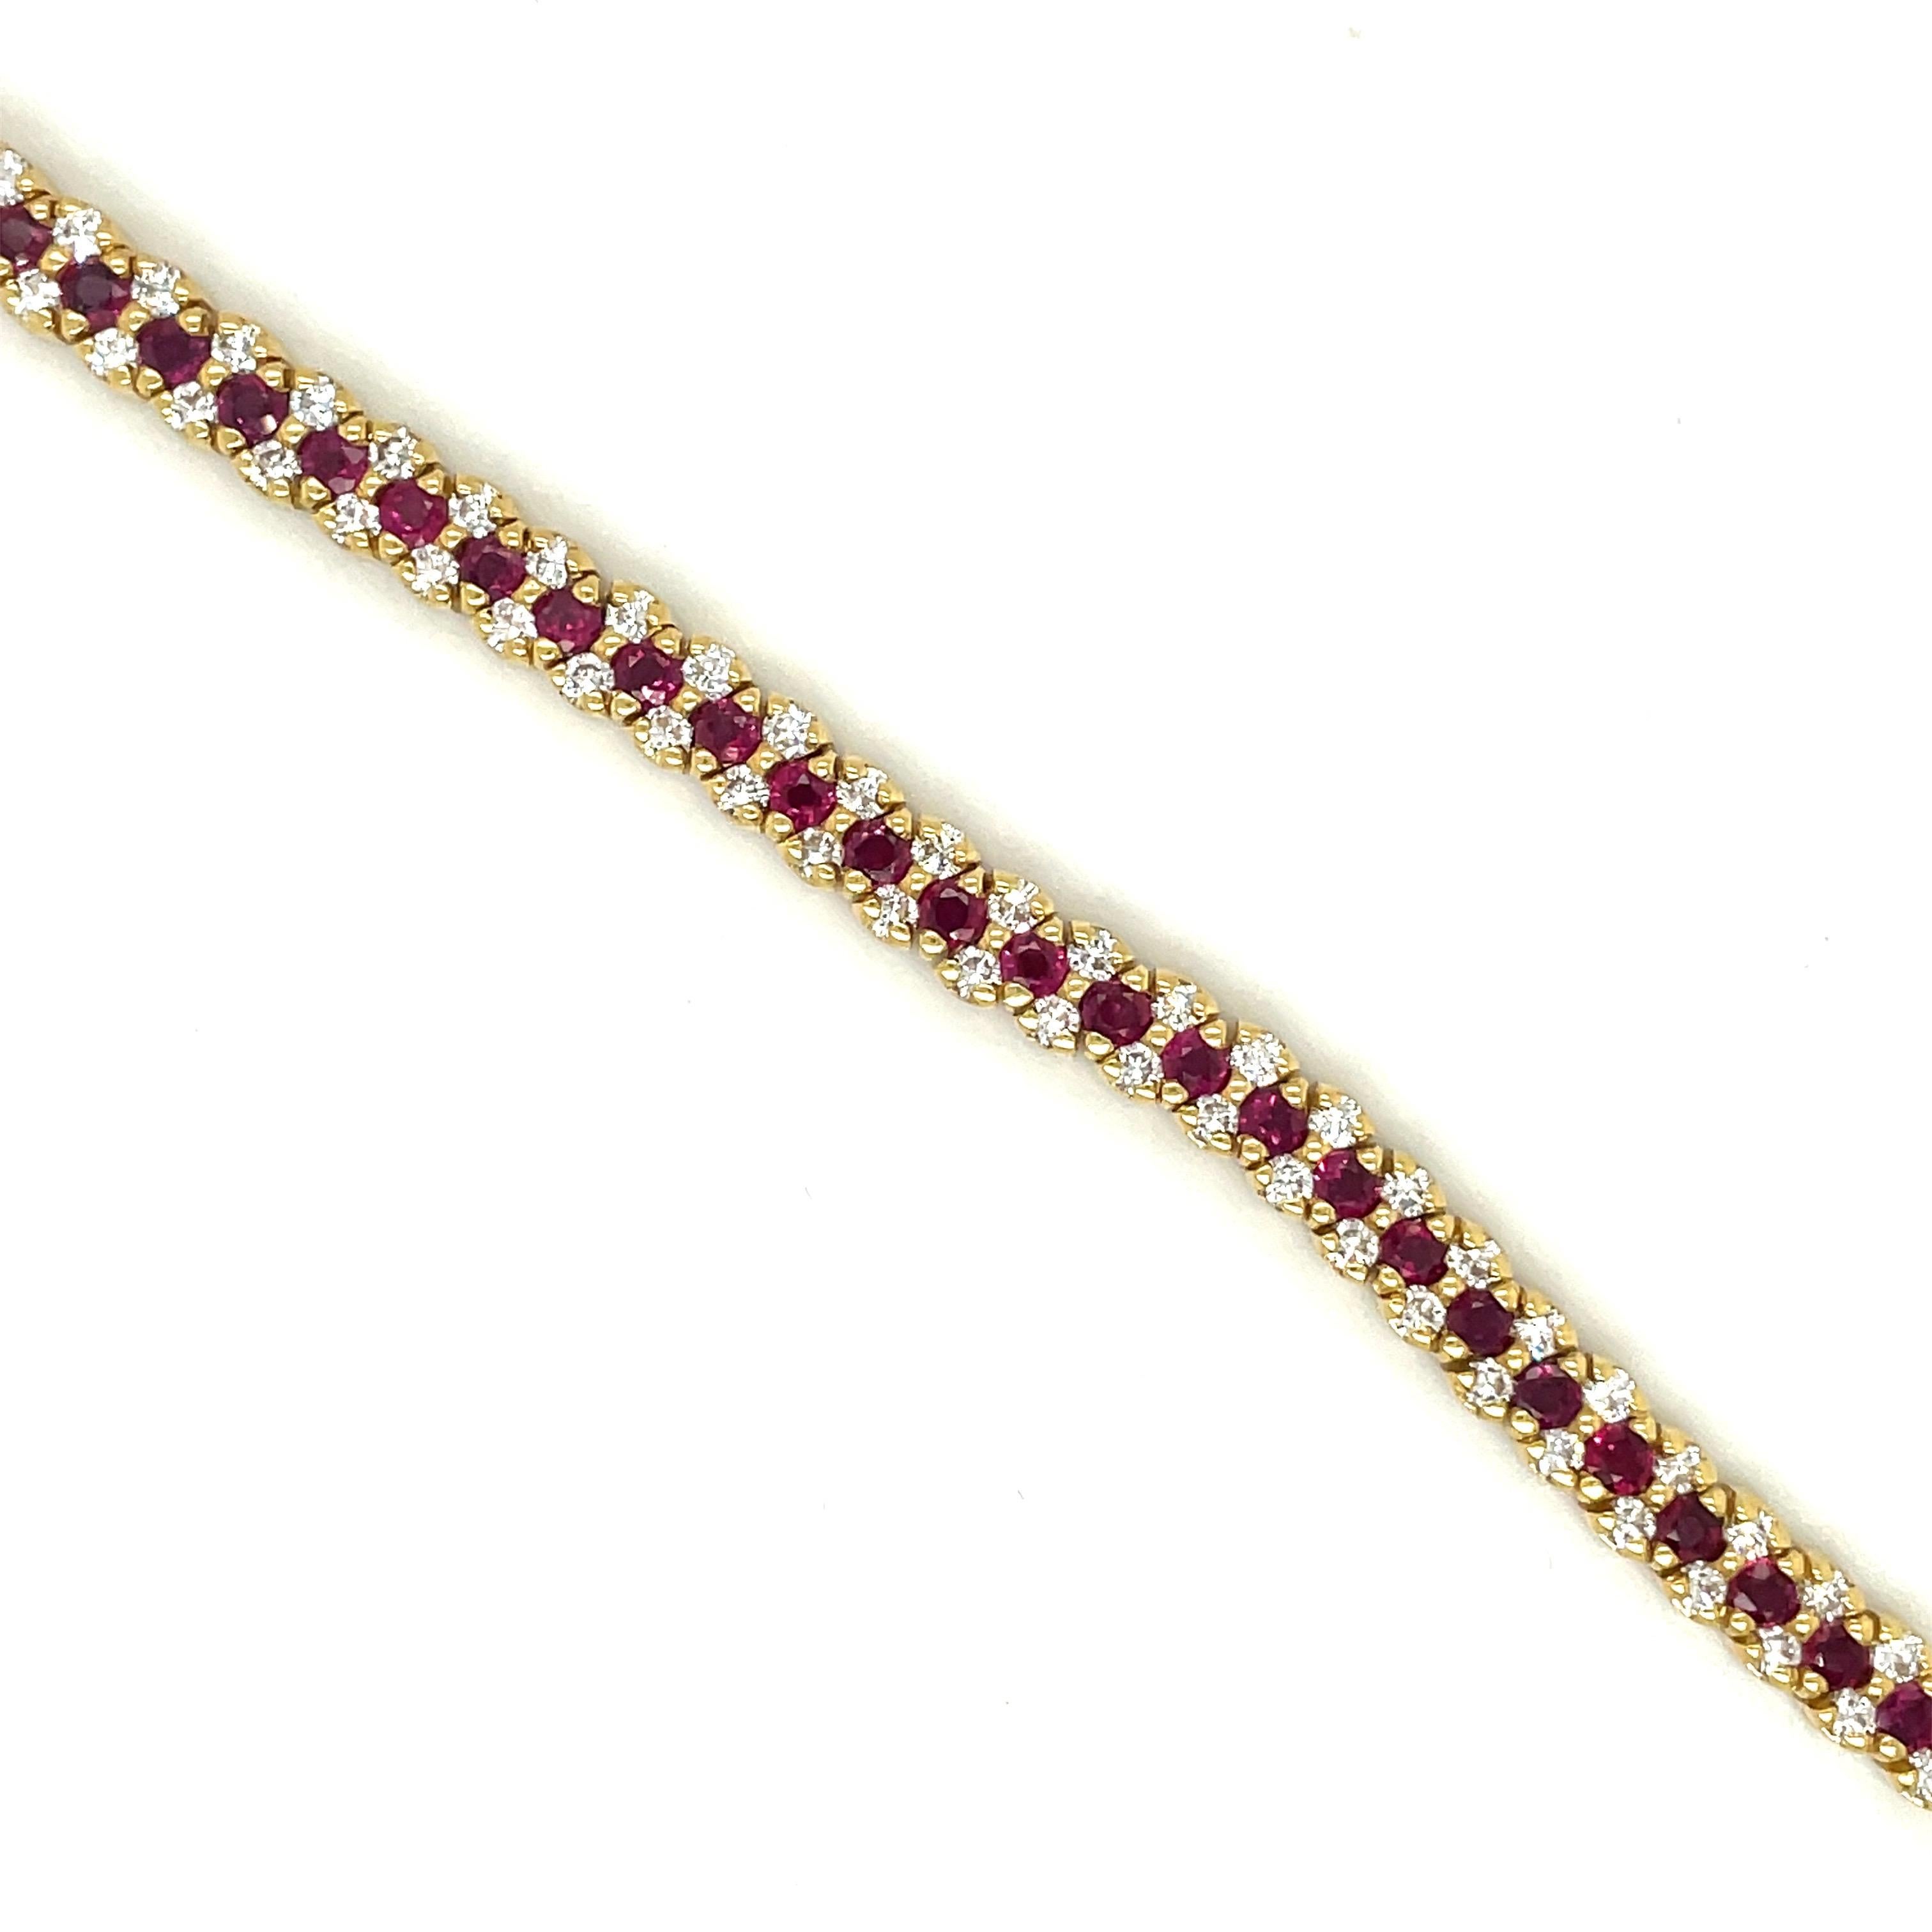 18 karat yellow gold tennis bracelet. This bracelet is designed with a center row of round brilliant cut rubies, and two rows of round brilliant cut diamonds. This is a timeless and classic bracelet. The bracelet measures 7